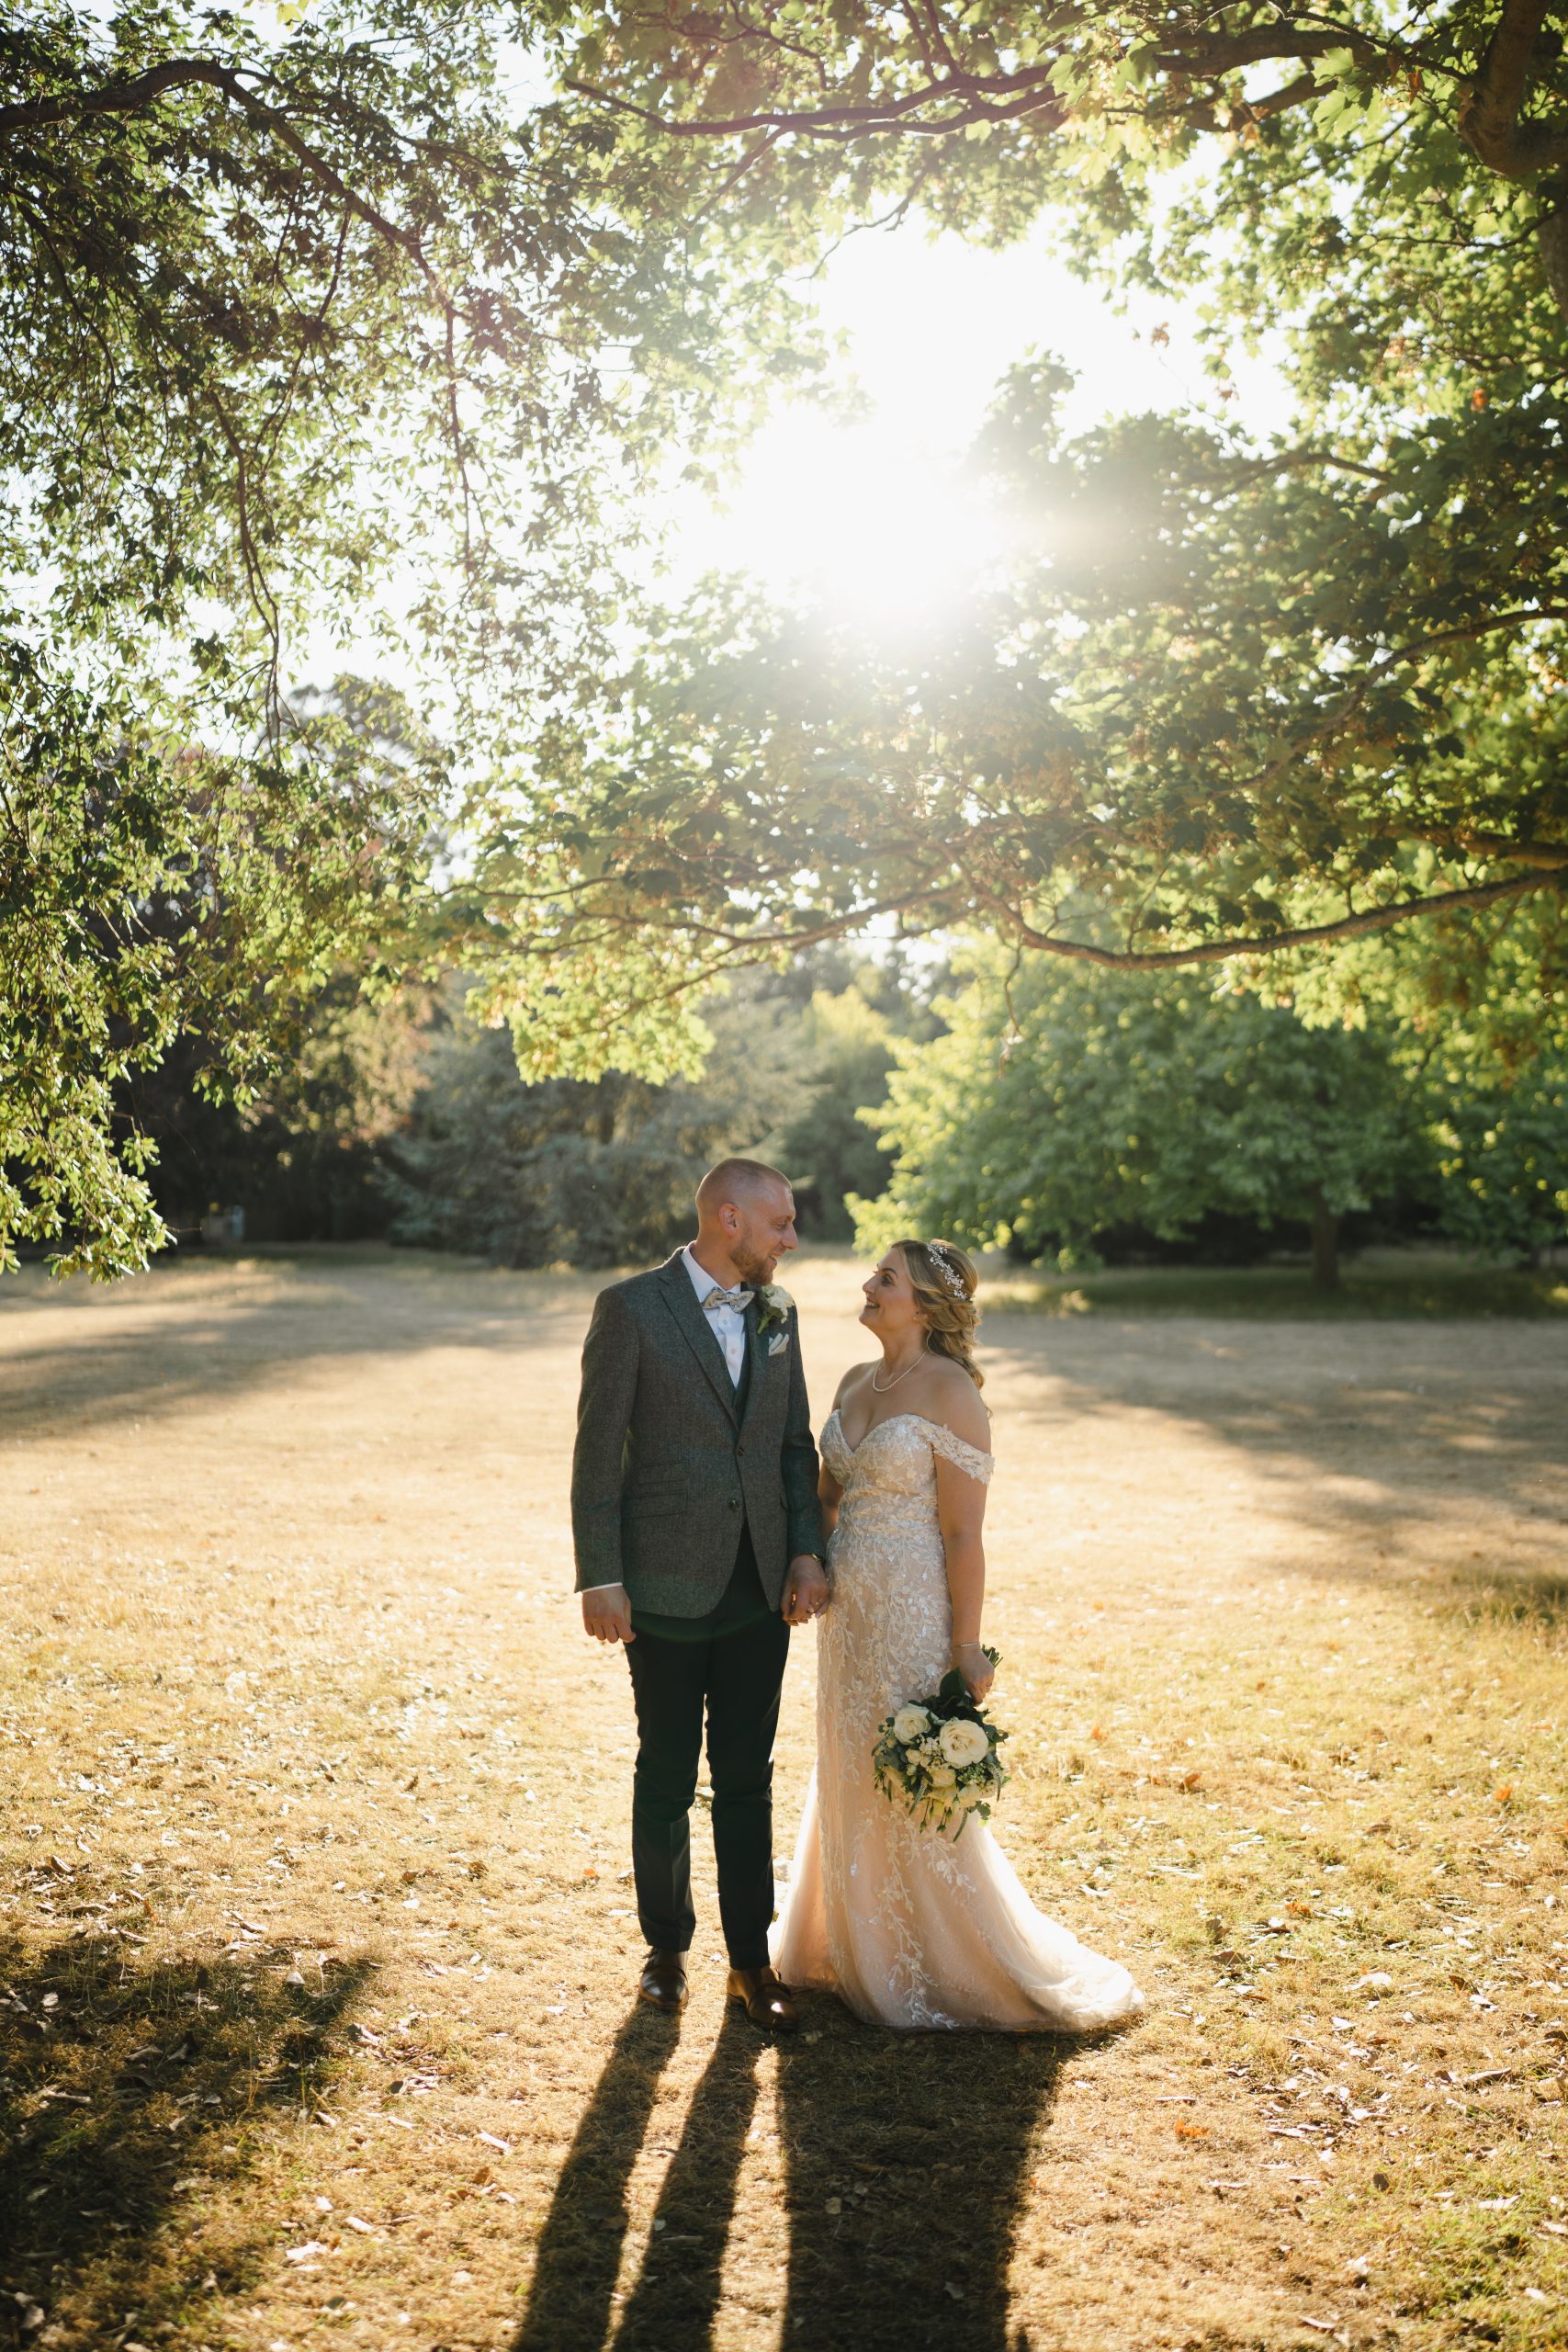 Spring Wedding - Quex Venue. Two newly-weds in the golden hour sun,